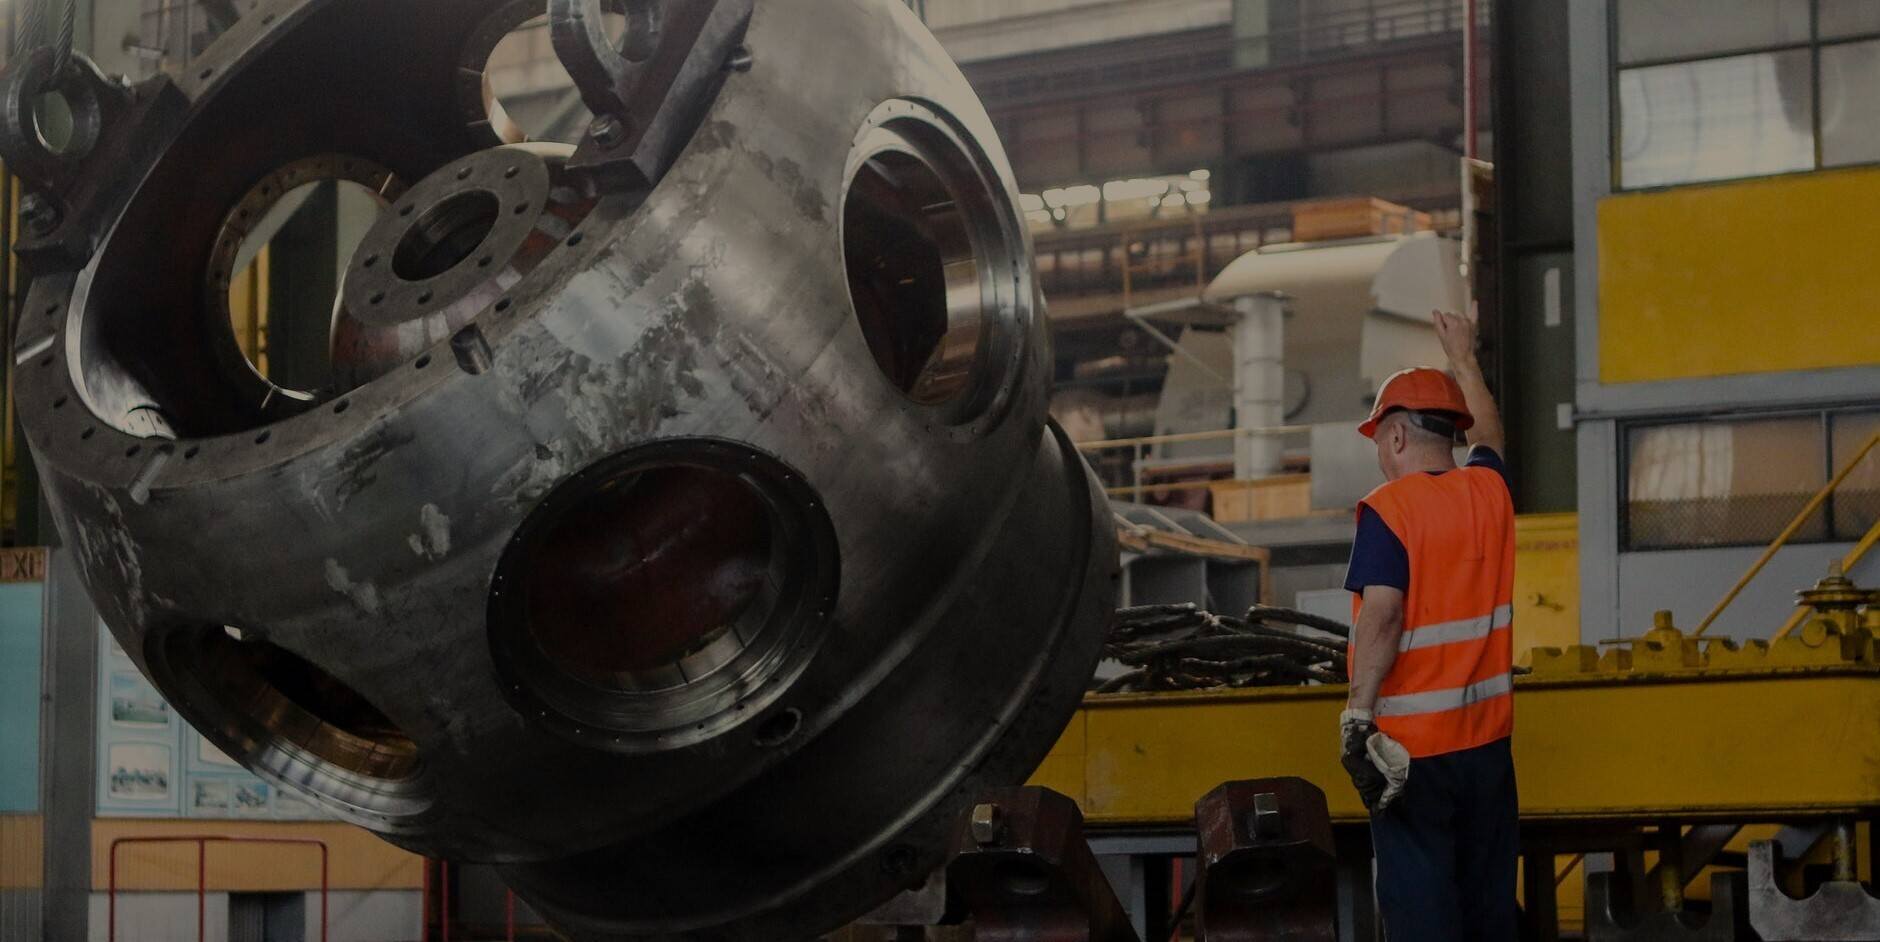 A worker inspecting a large metal wheel in a factory.